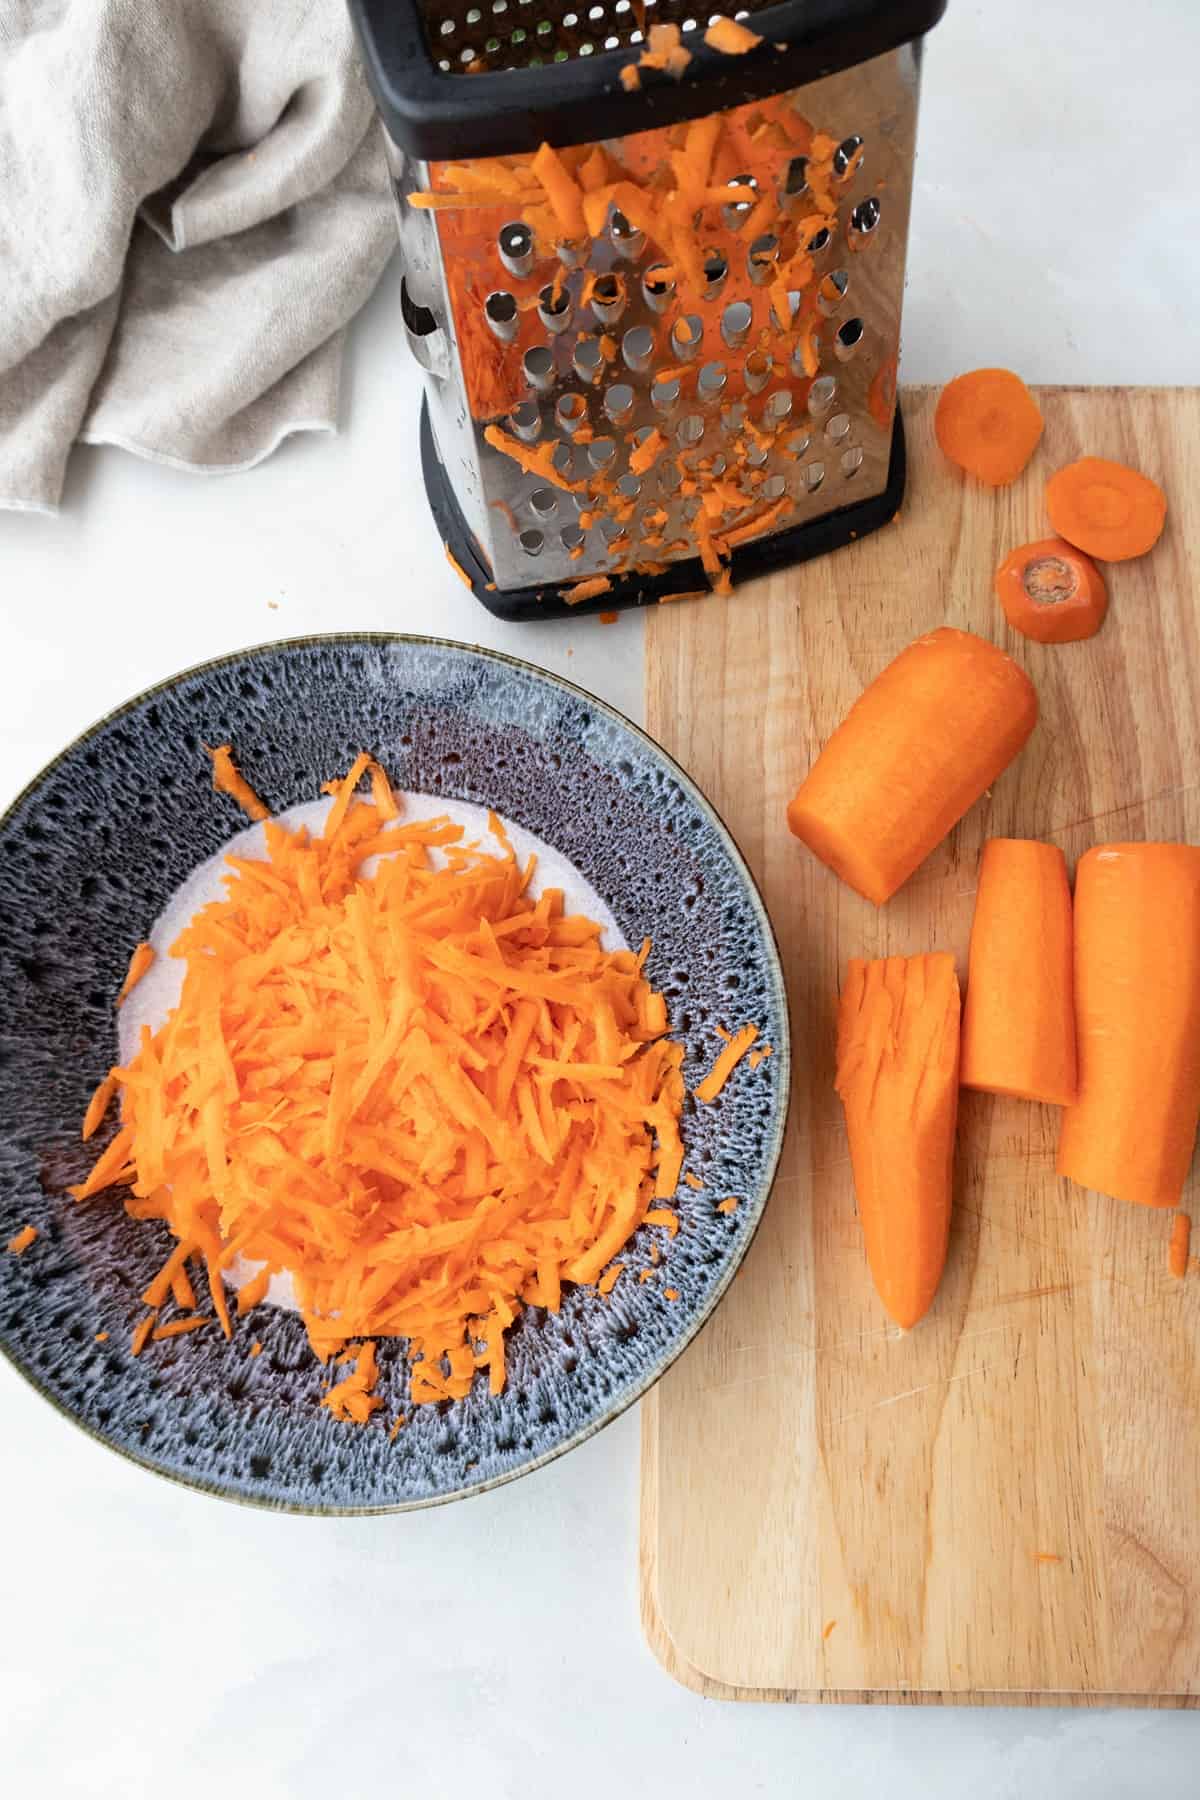 carrots cut in chunks and shredded with box grater